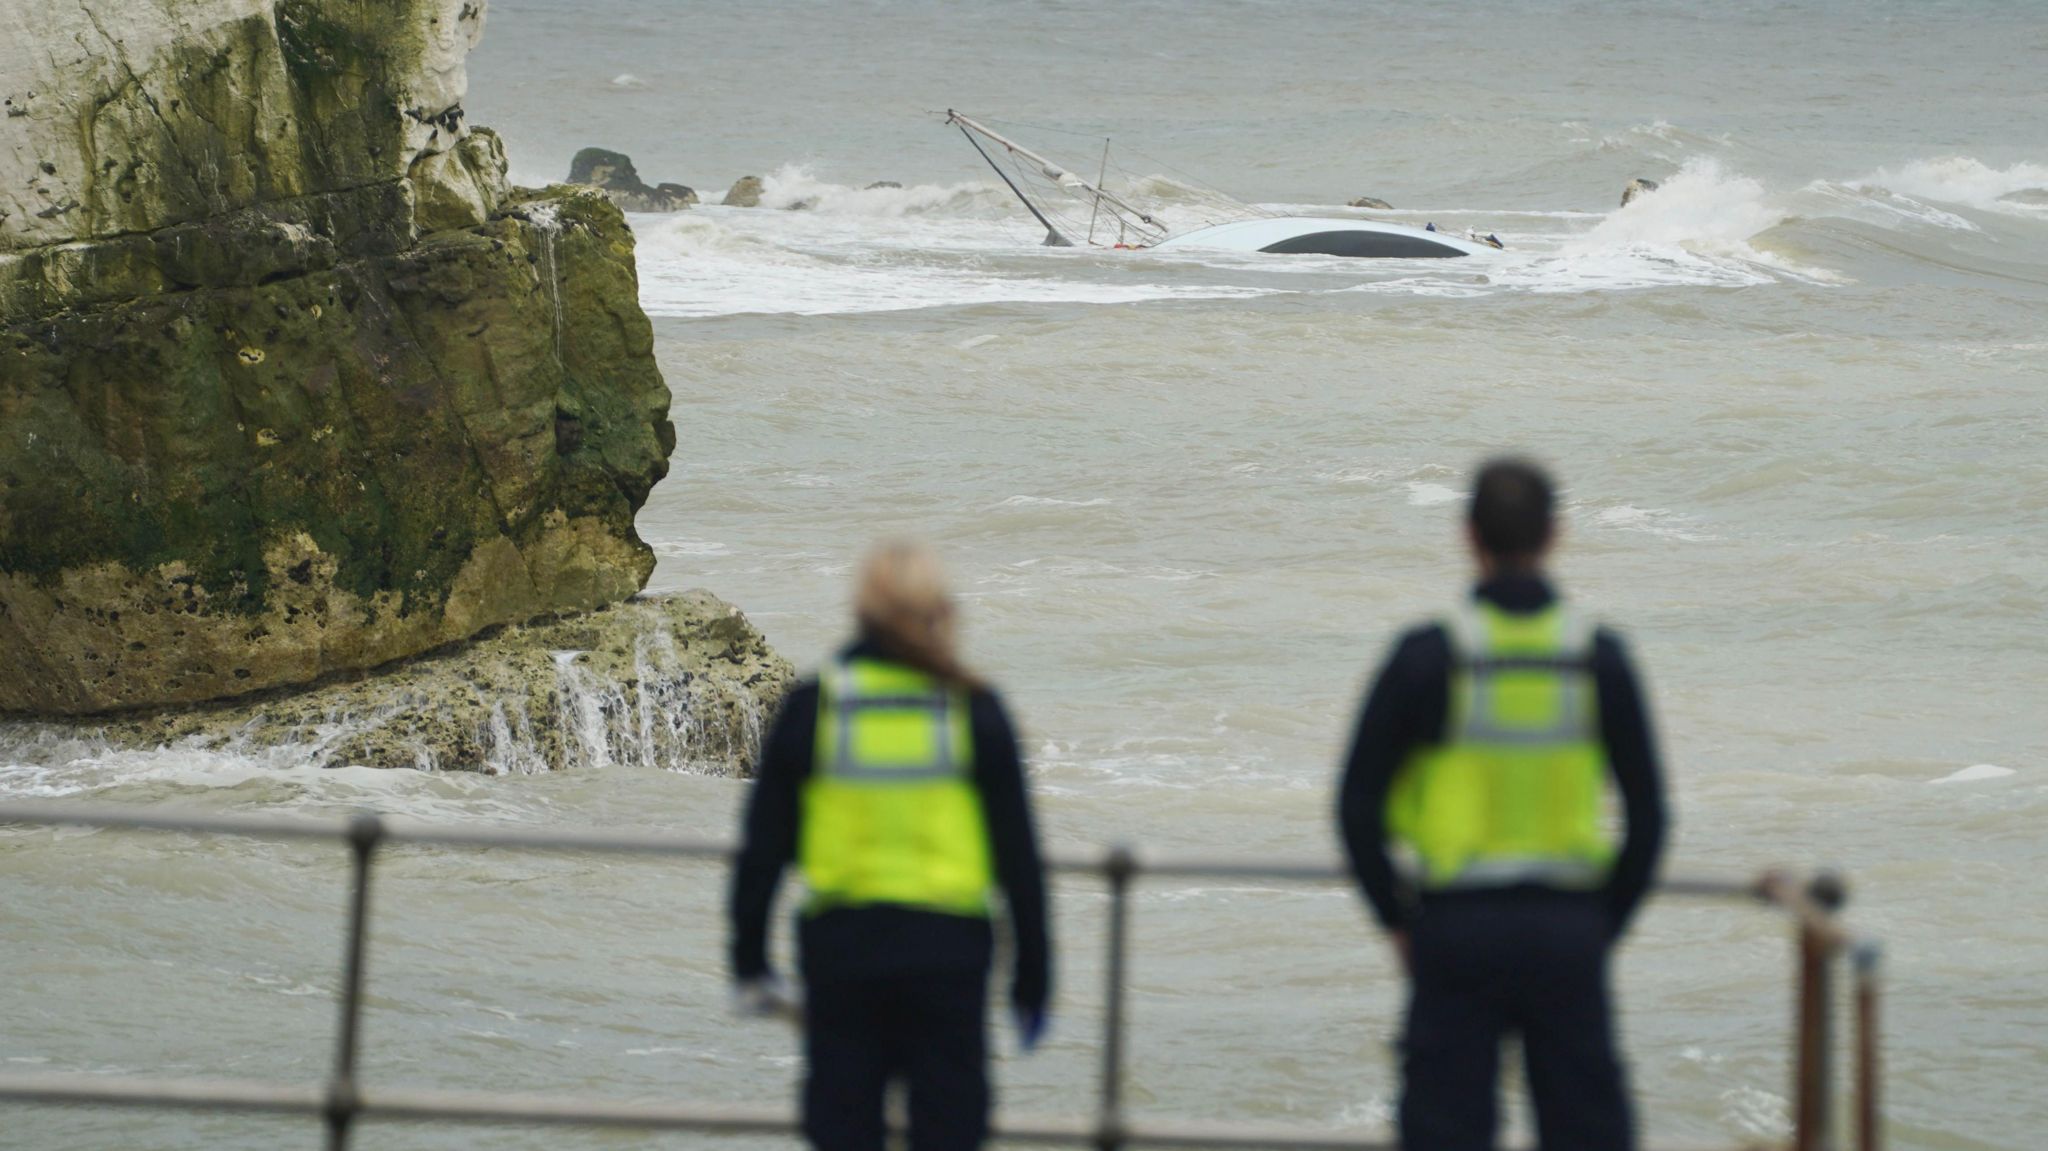 Two Border Force officers look at the capsized yacht near Seaford